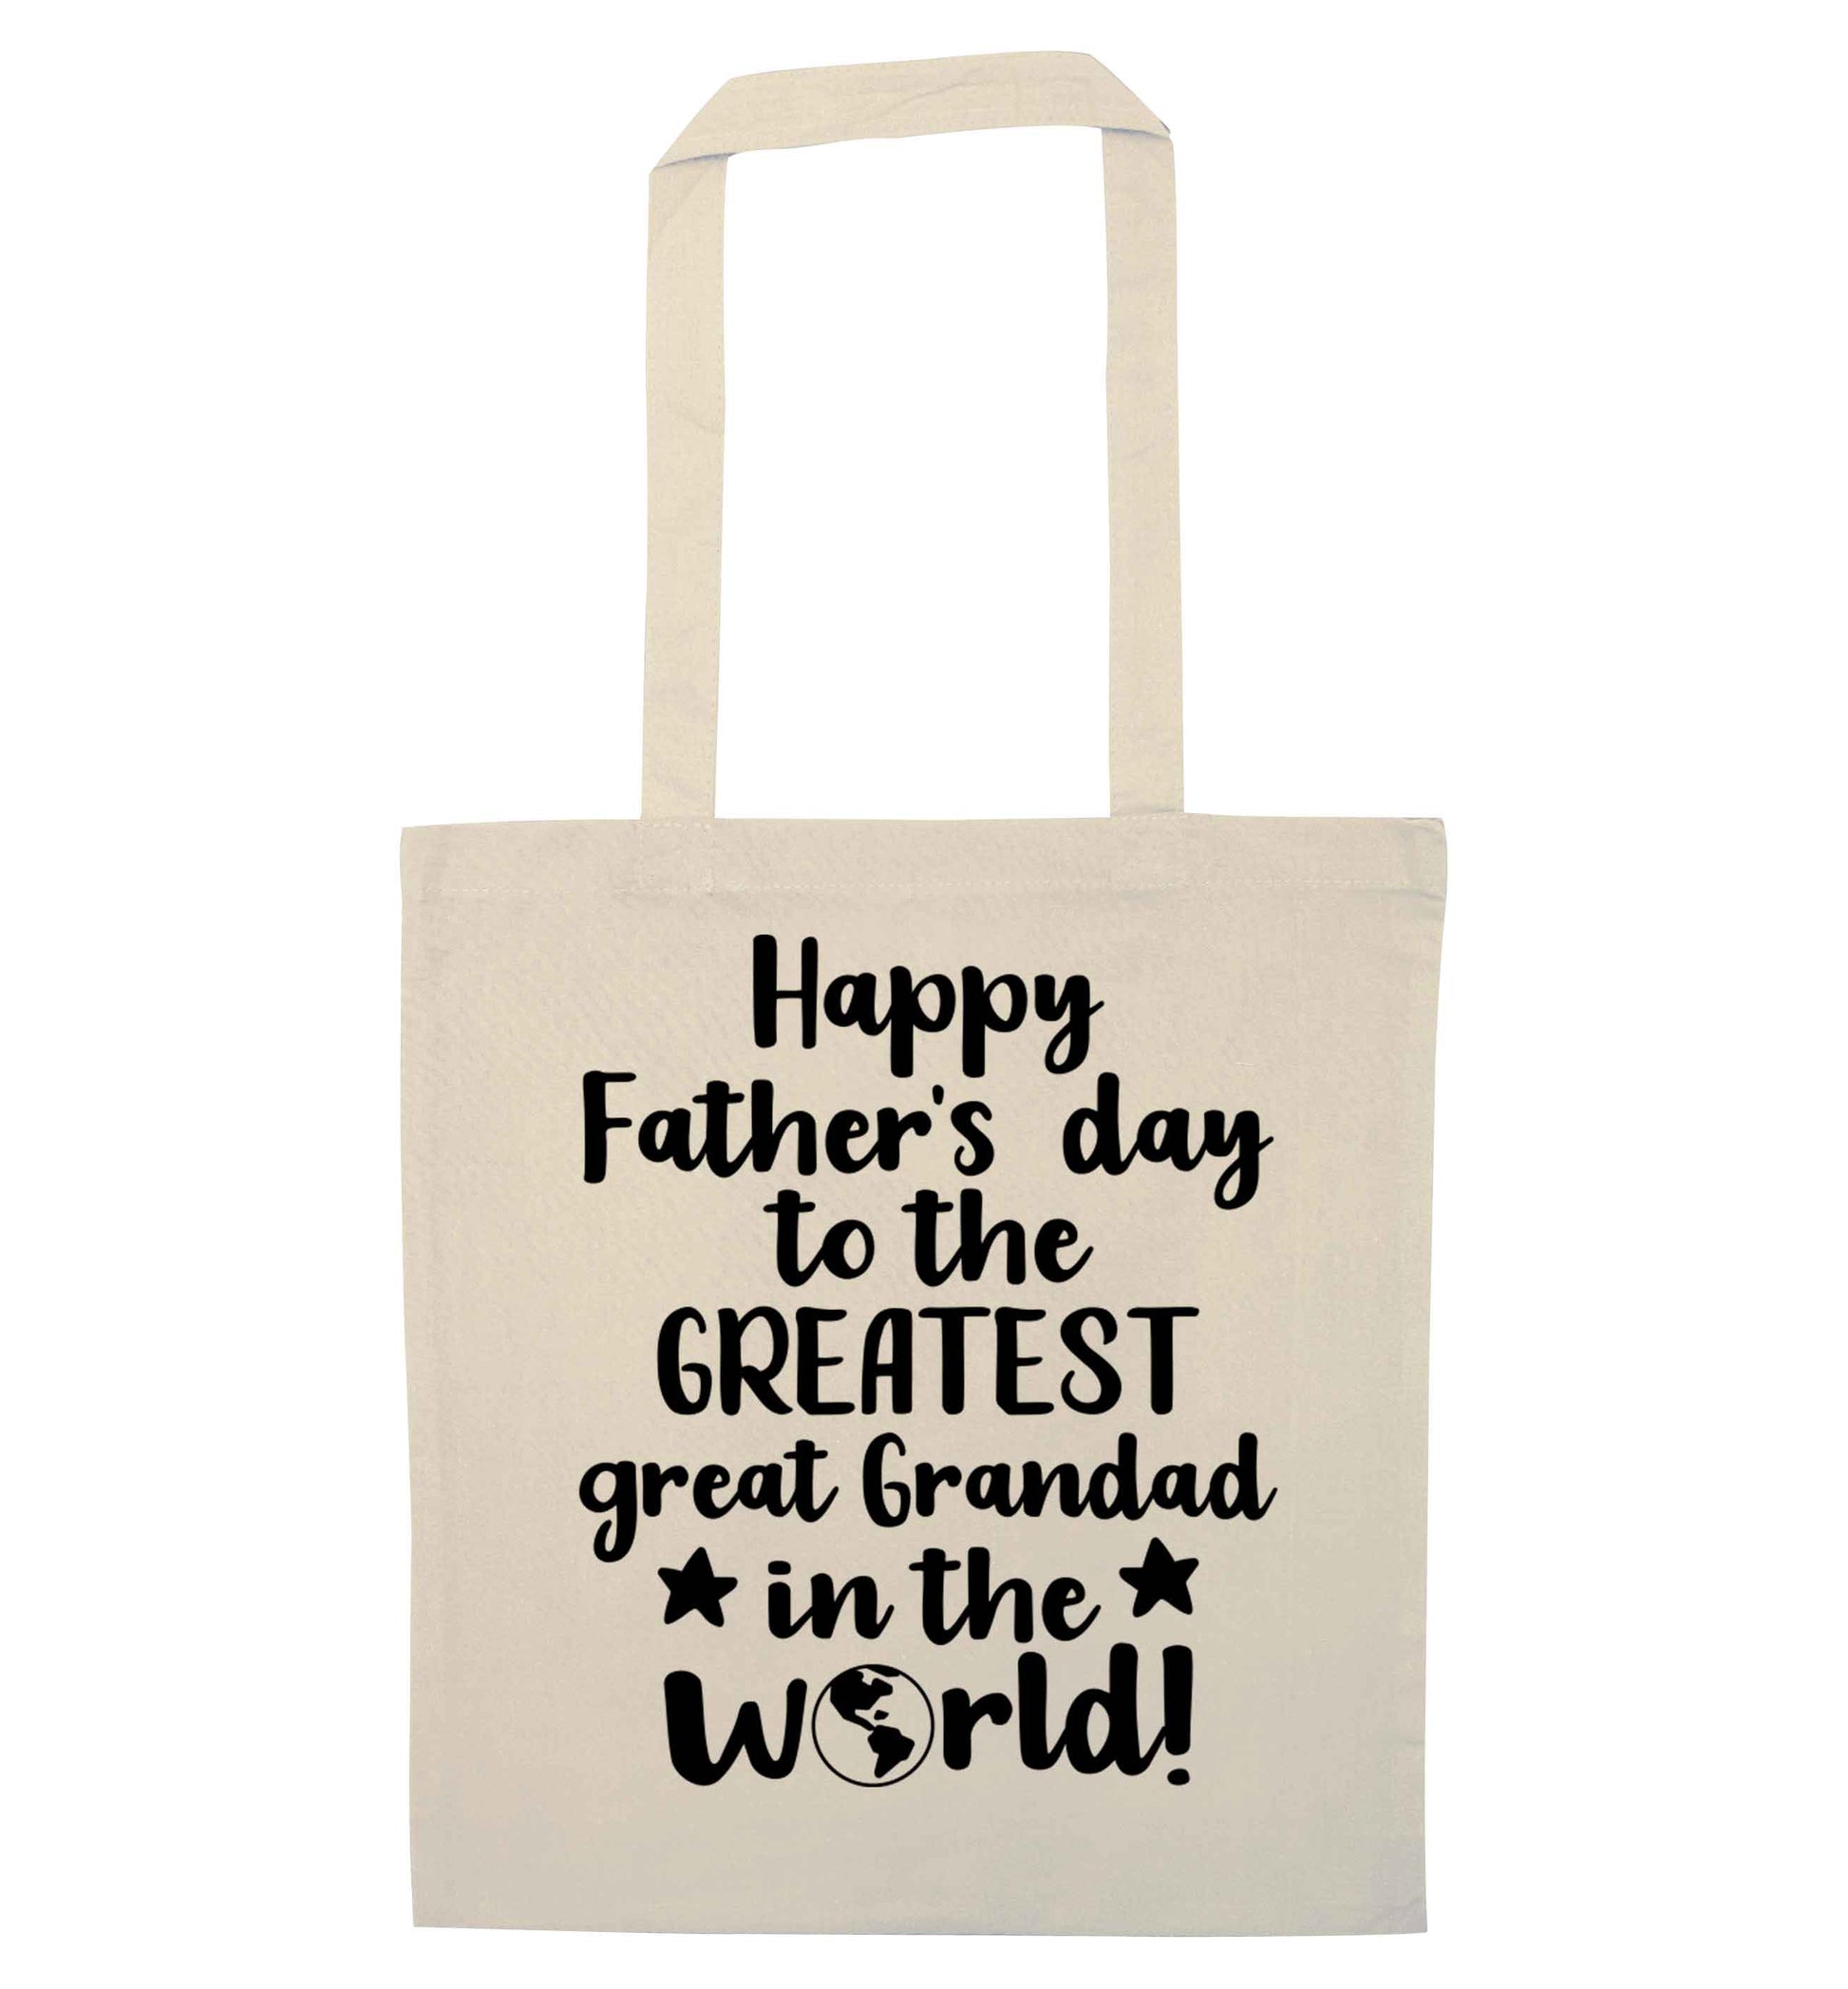 Happy Father's day to the greatest great grandad in the world natural tote bag